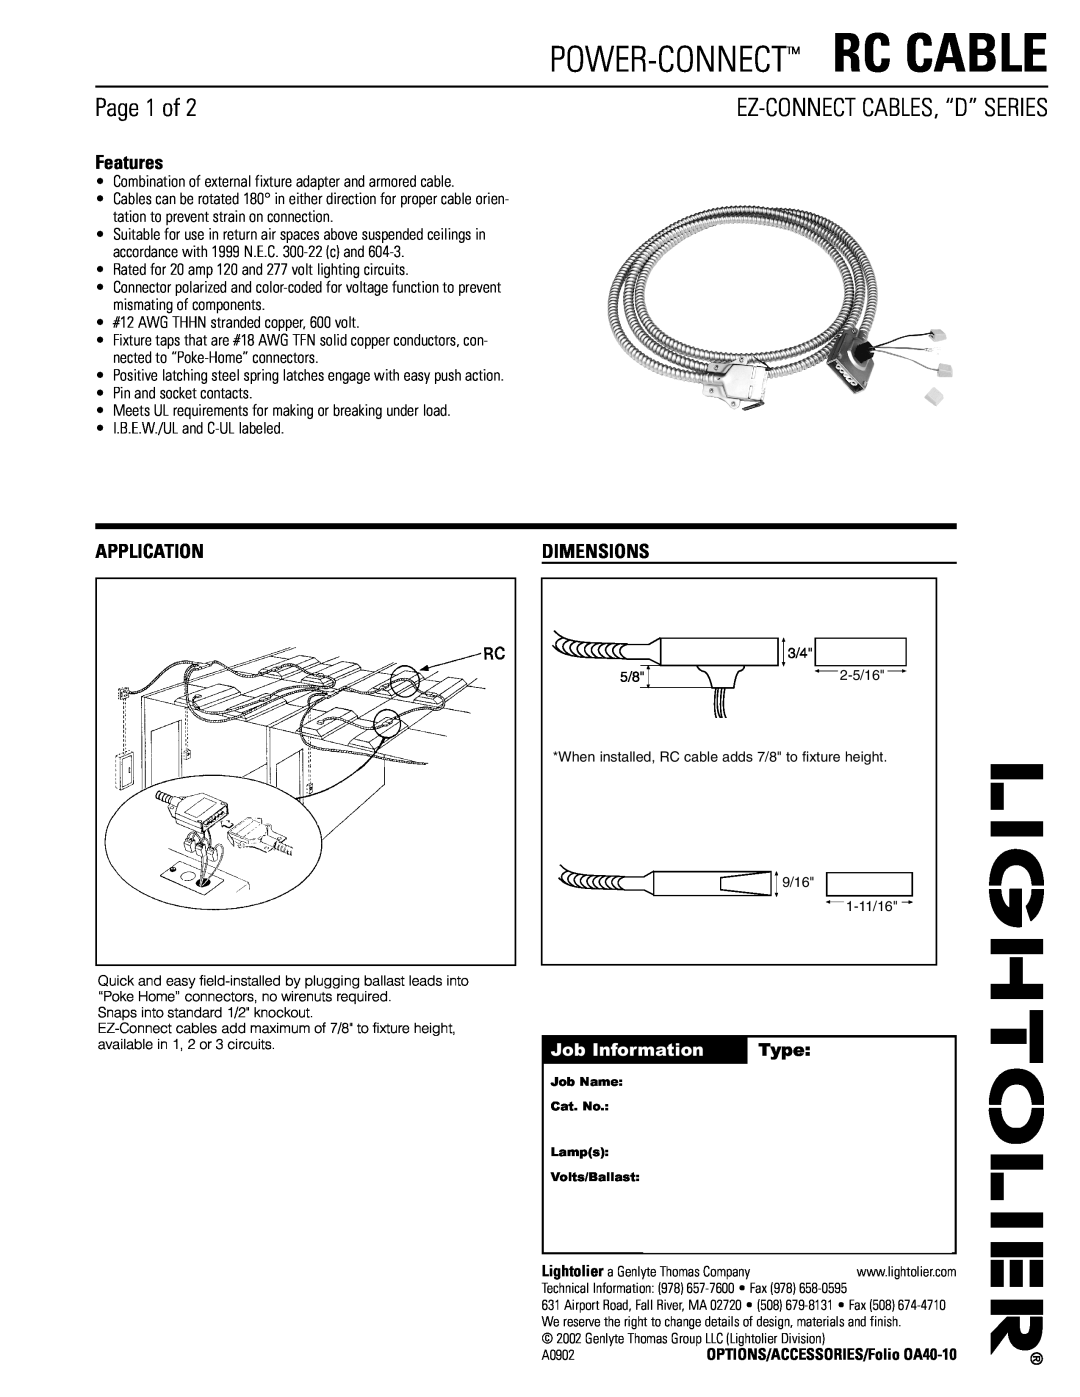 Lightolier D" Series dimensions Page 1 of, Features, Application, Dimensions, Job Information, Type 